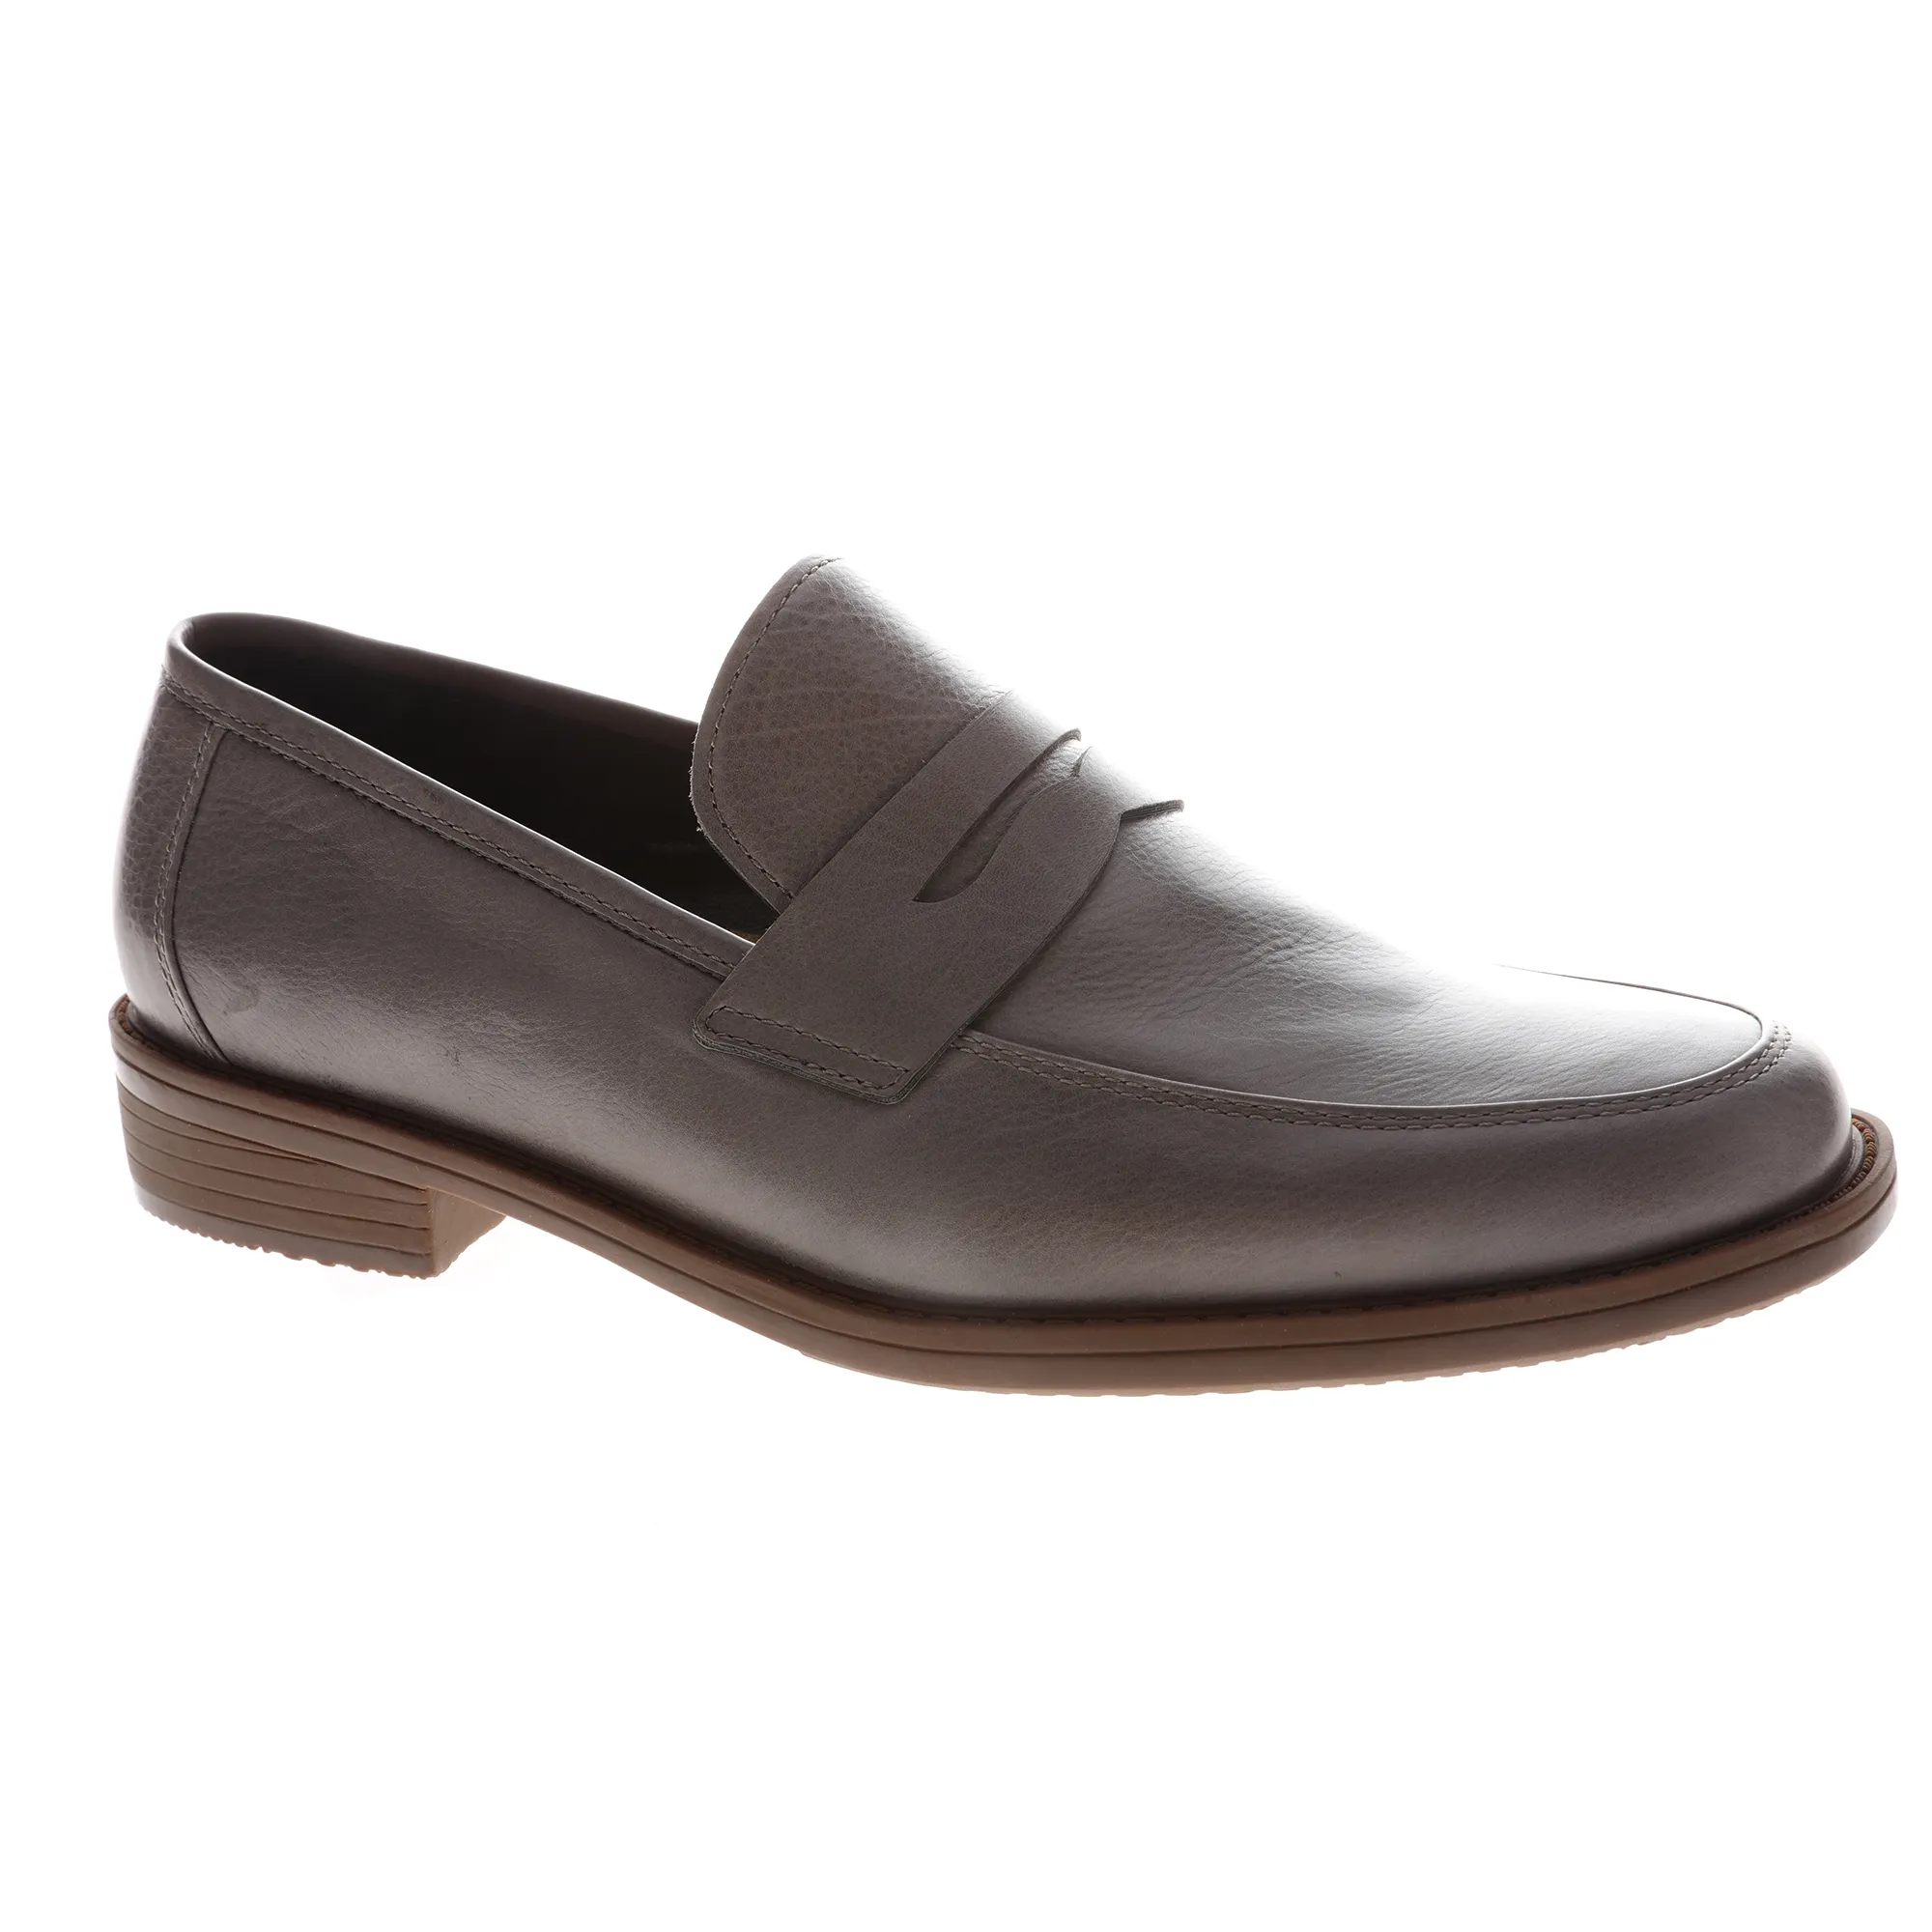 Classic Grey Slip-on Genuine Leather Loafer Men Dress Shoes